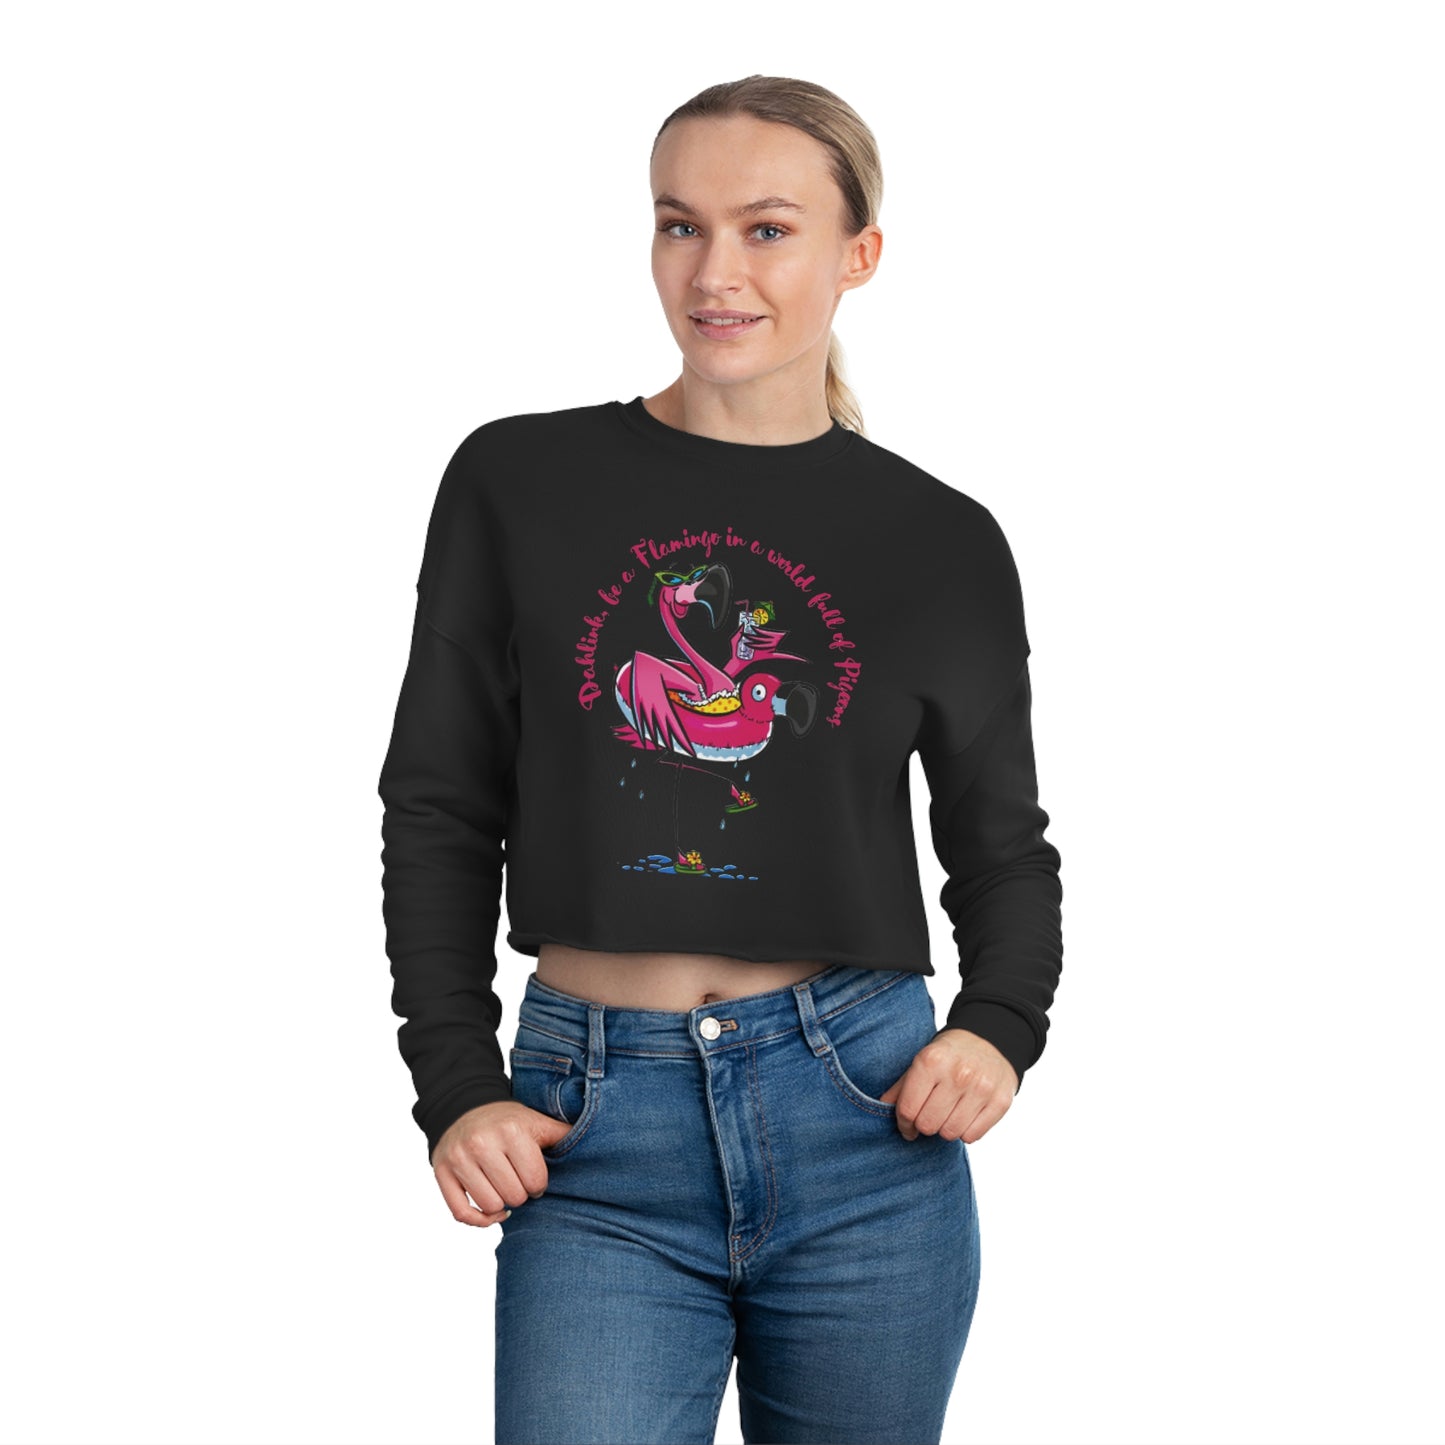 ‘Dahlink, be A flamingo in a world of pigeons’  Women's Cropped Sweatshirt